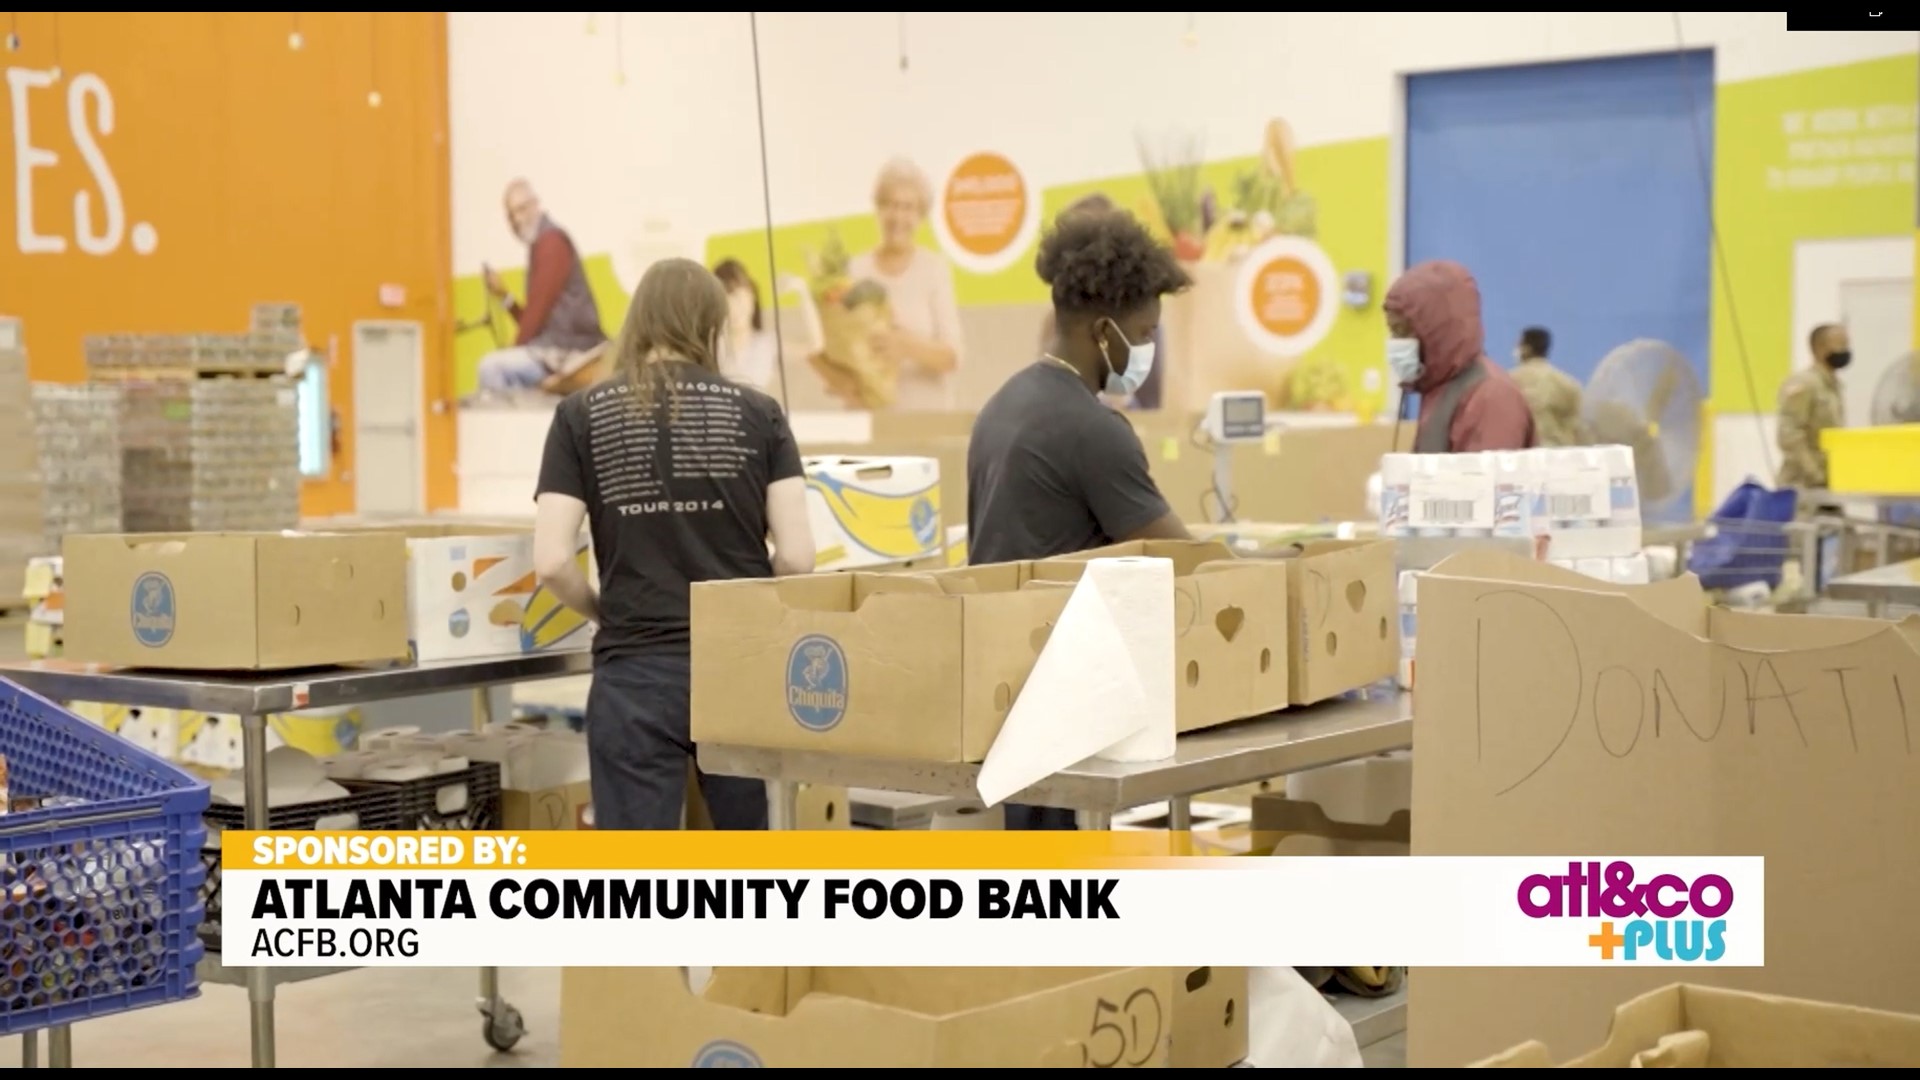 Help end hunger in our community by giving back to the Atlanta Community Food Bank. See how they're working hard this holiday season to help families in need.